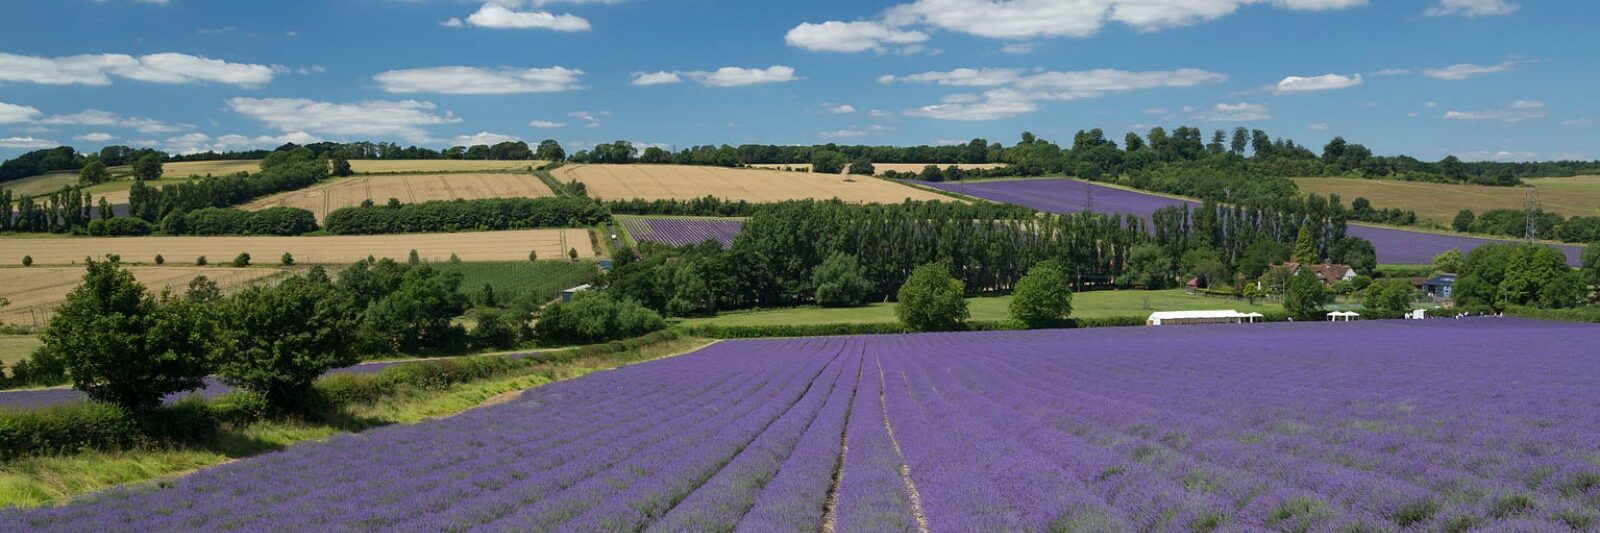 Lavender fields with woodlands and crop fields in background, on a sunny day.